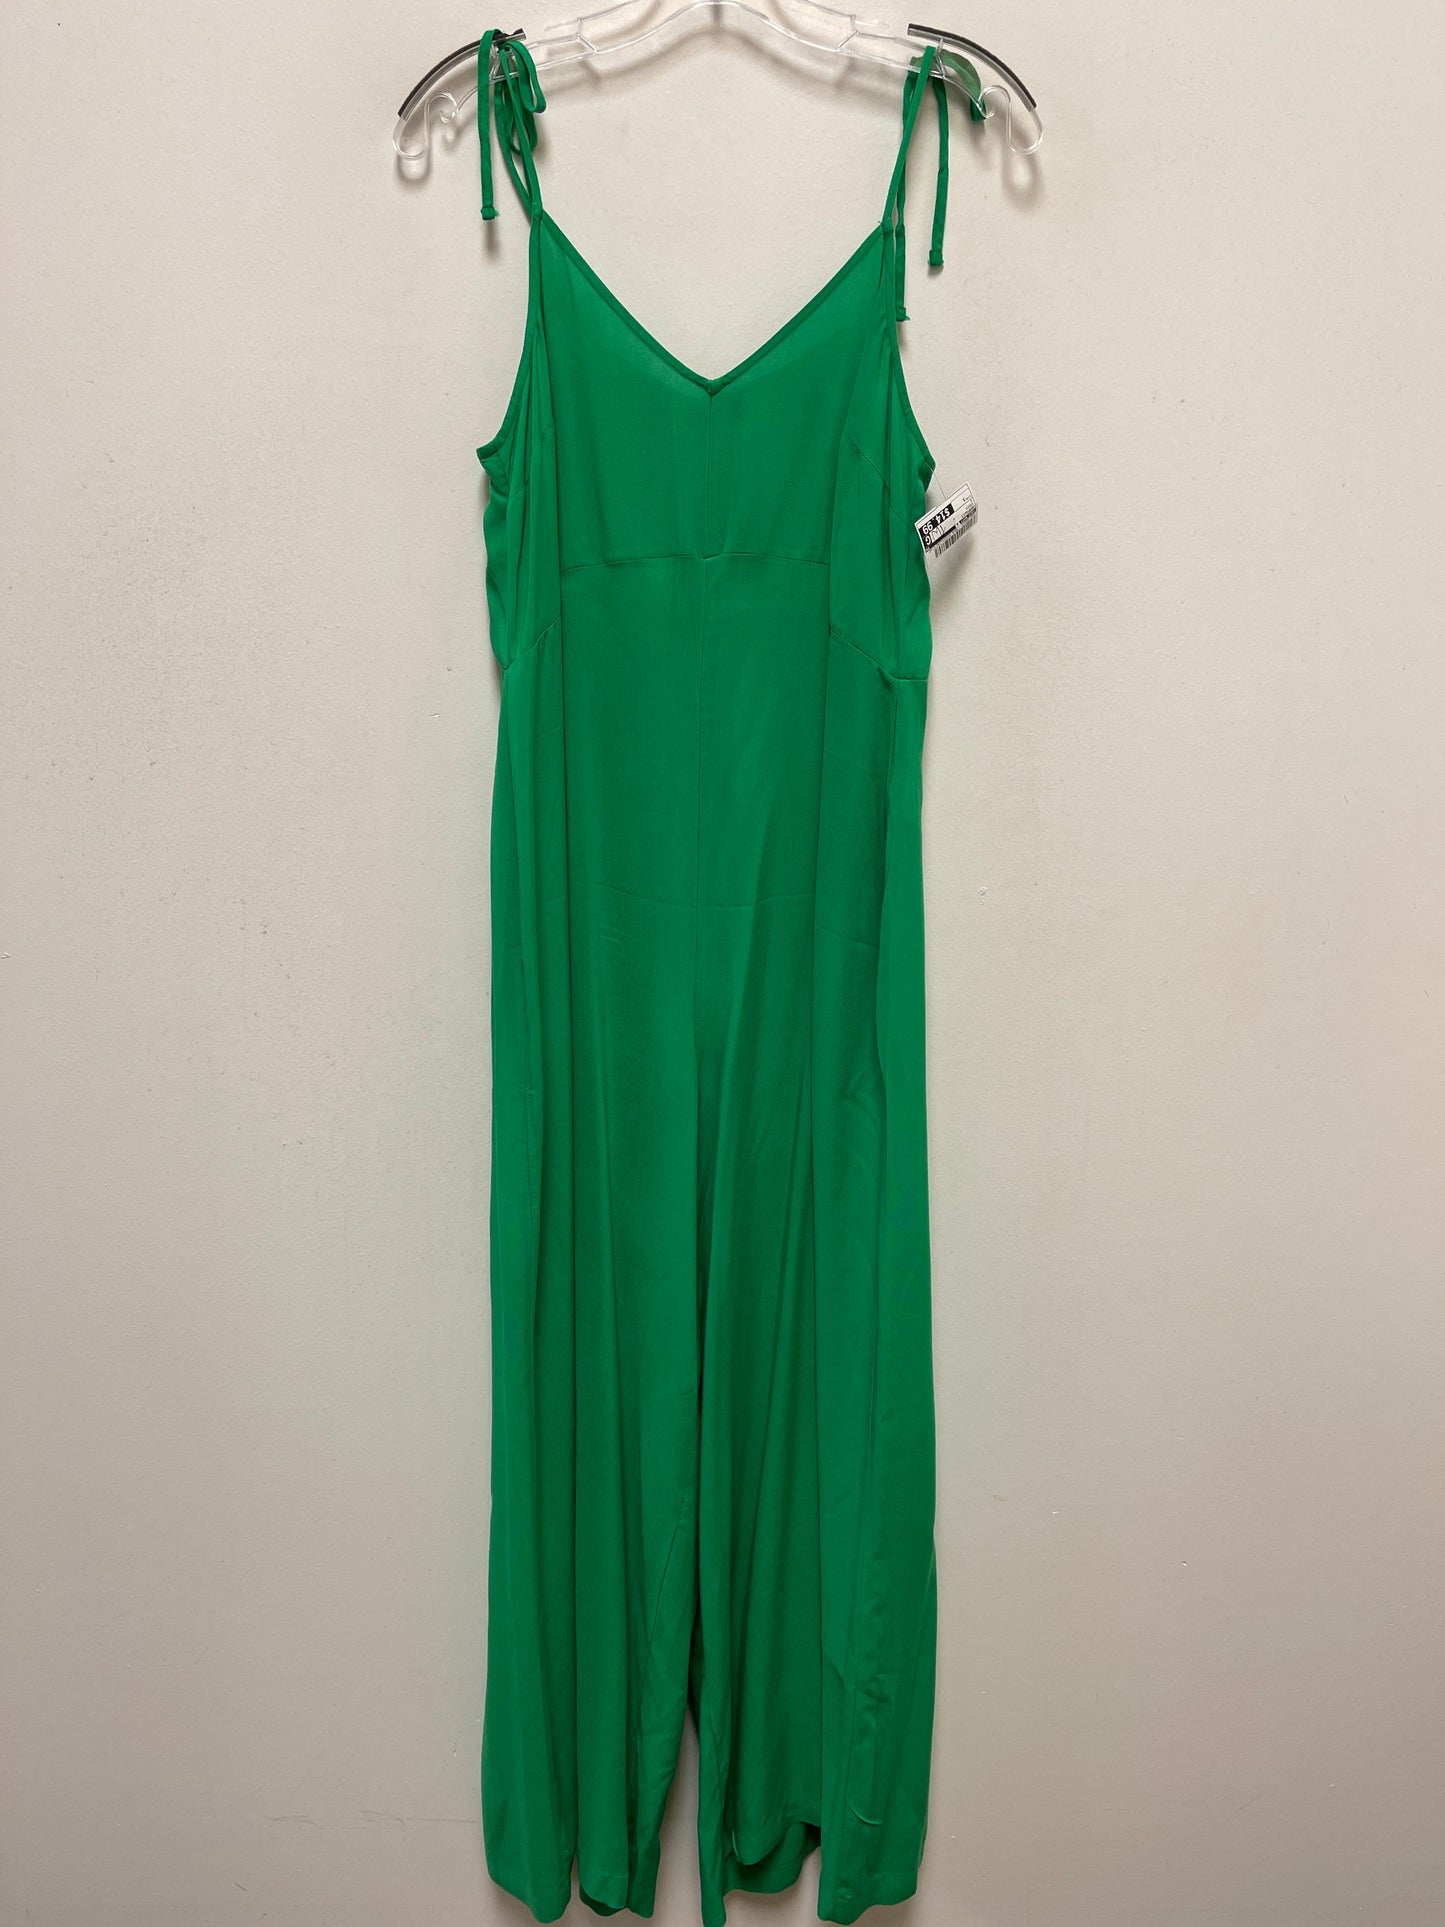 Green Jumpsuit Old Navy, Size S